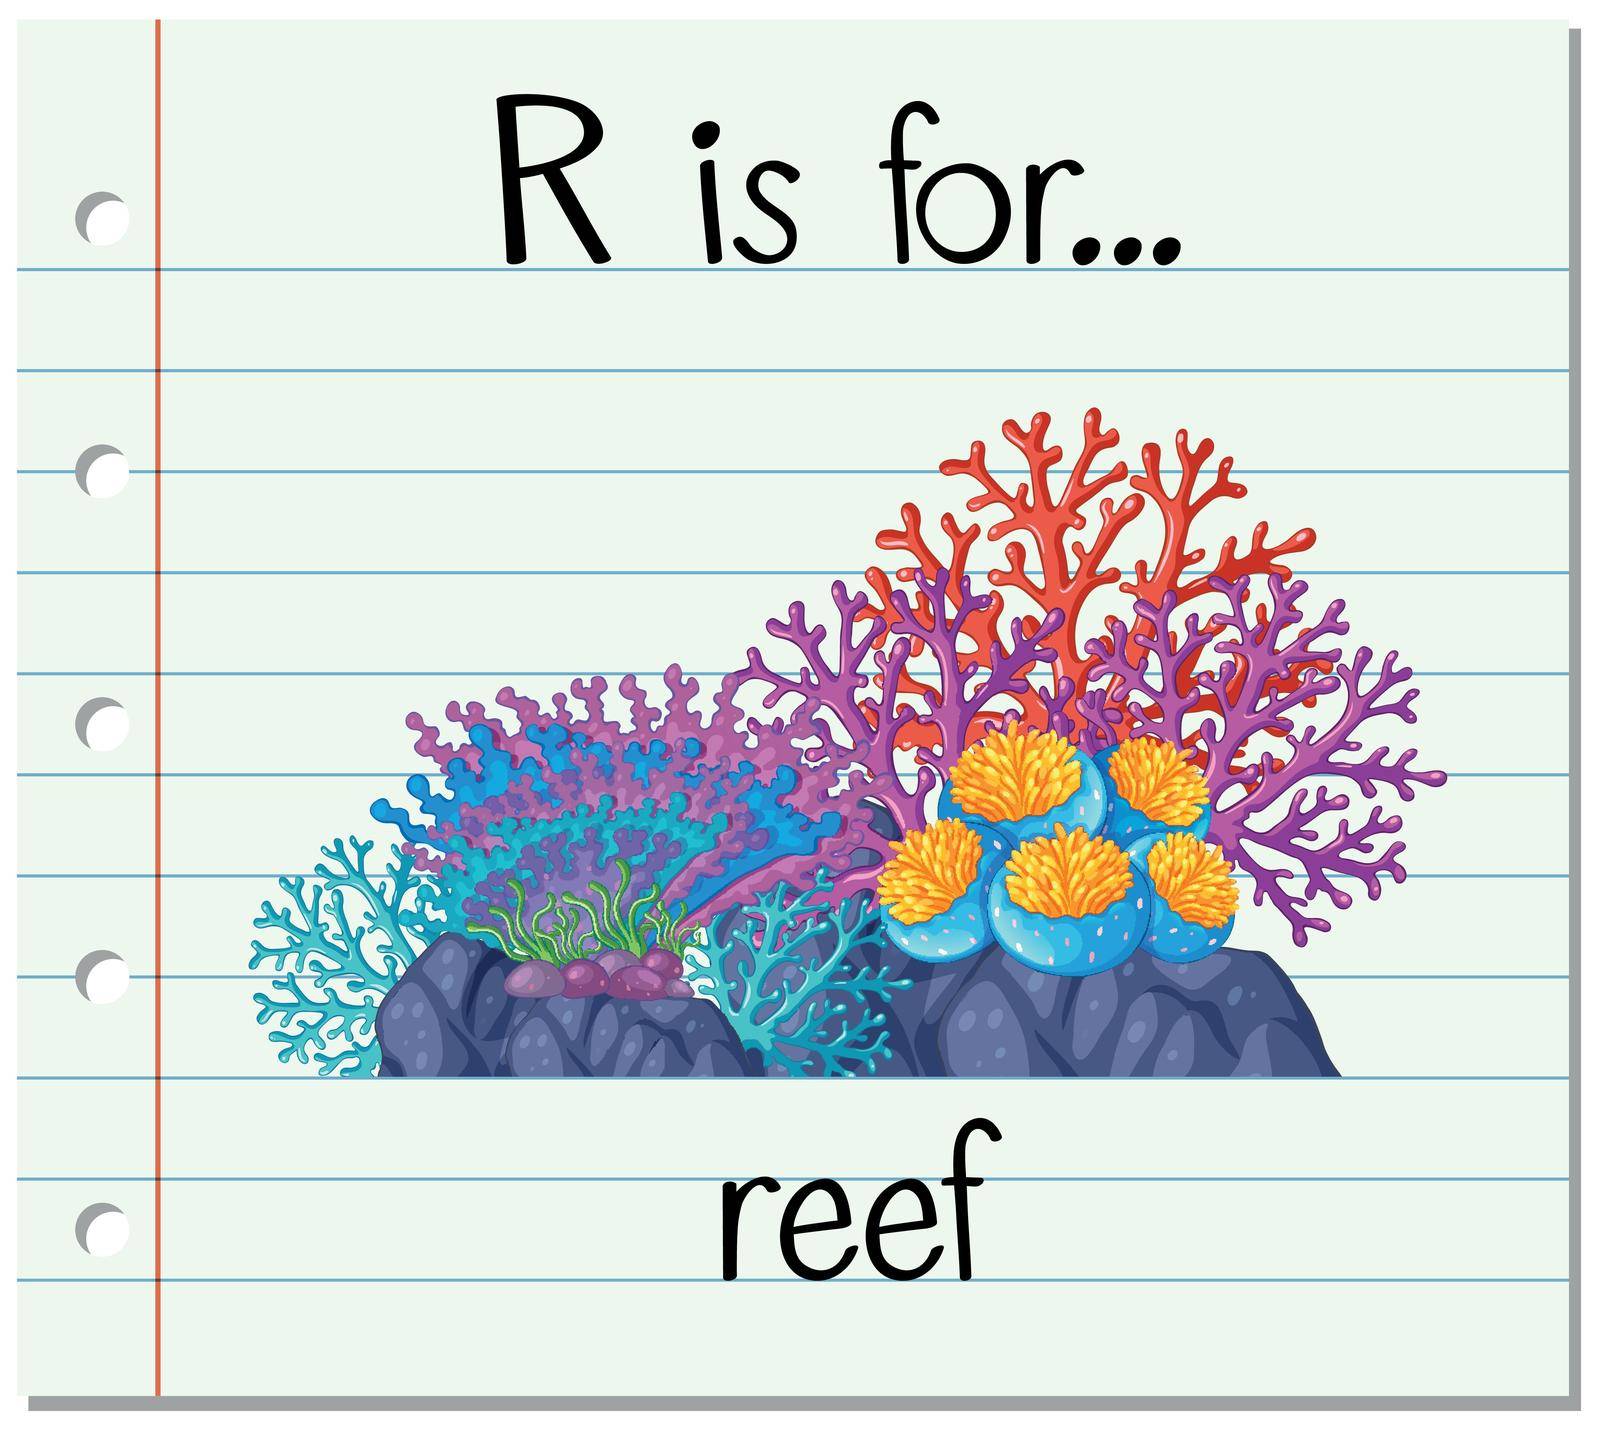 Flashcard letter R is for reef by iimages